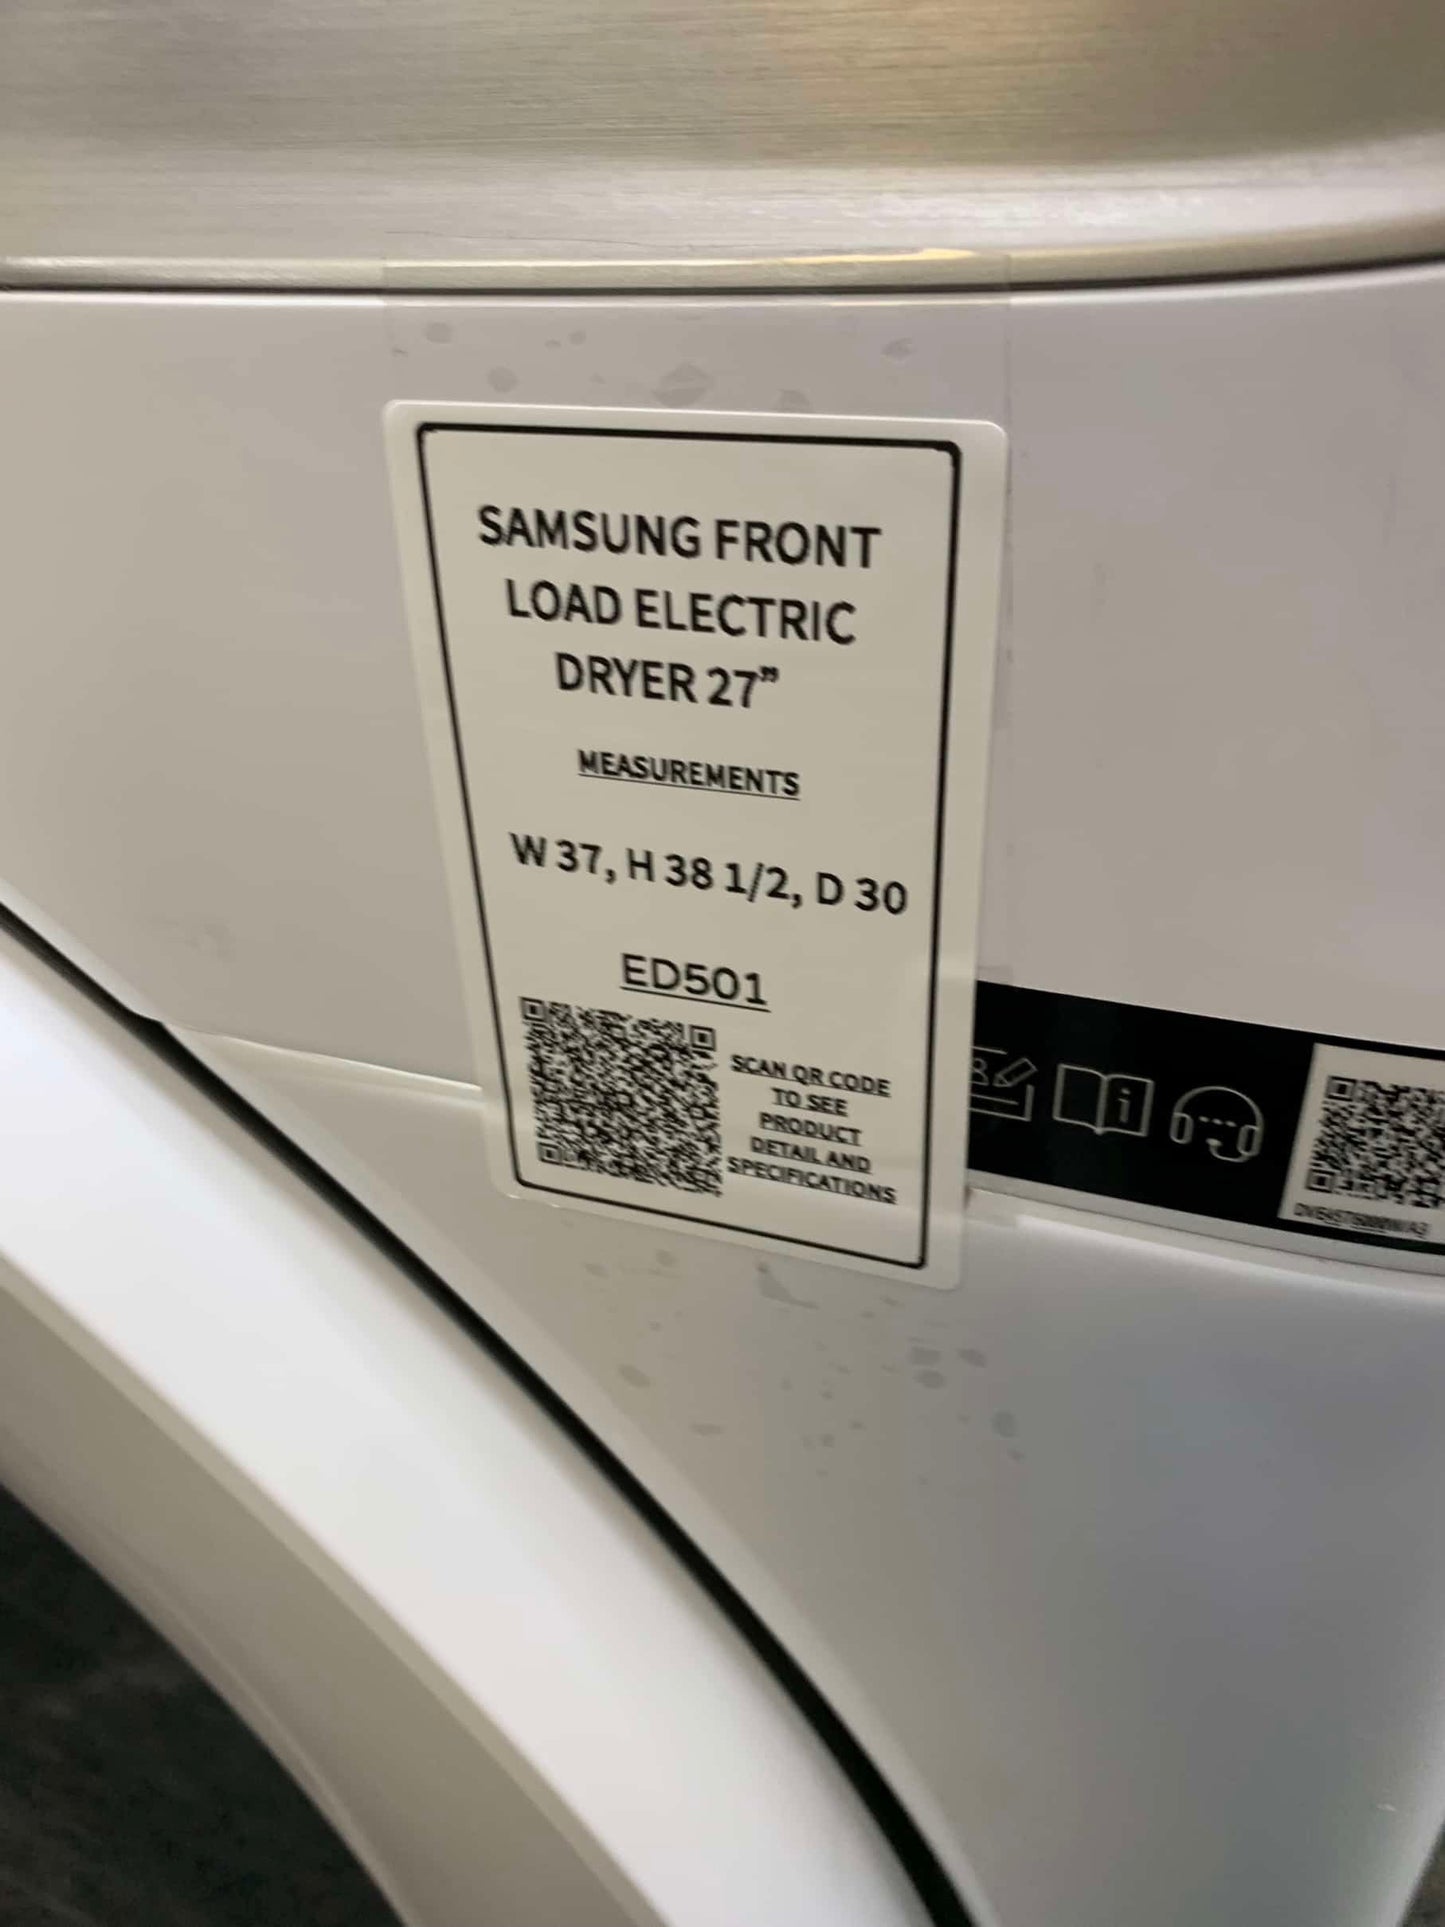 Samsung open box High-Efficiency 4.5 ft. Stackable Vented electric Dryer with Sensor Dry in white 27”